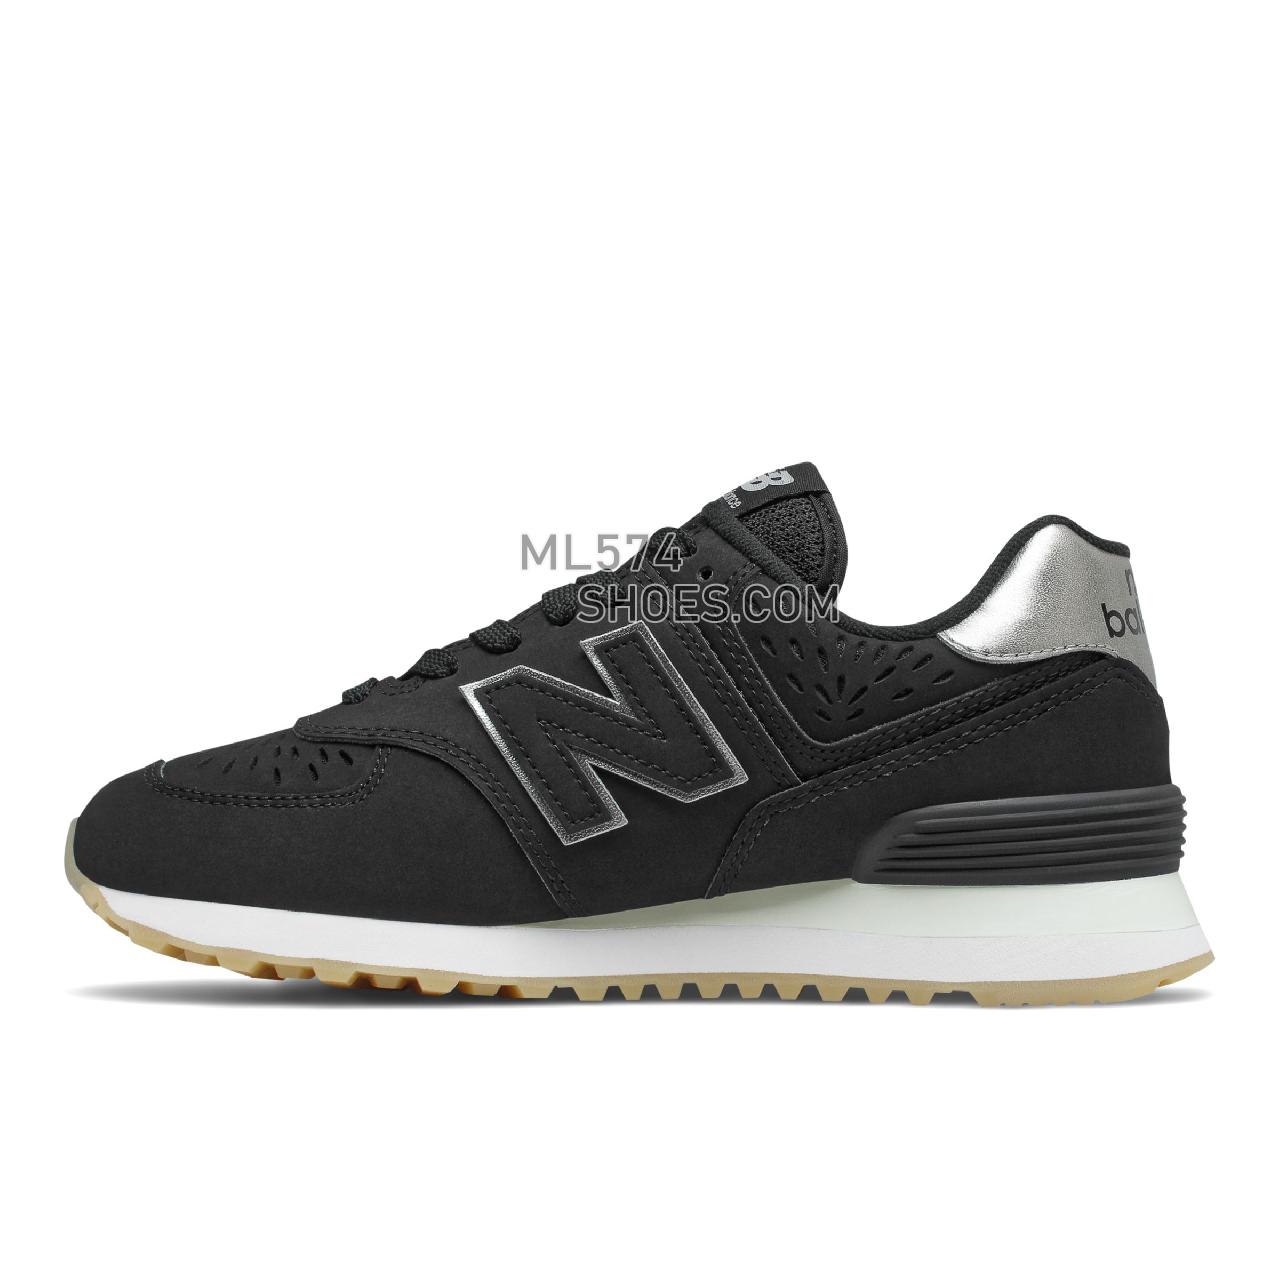 New Balance 574 - Women's Classic Sneakers - Black with Dark Silver - WL574SCP